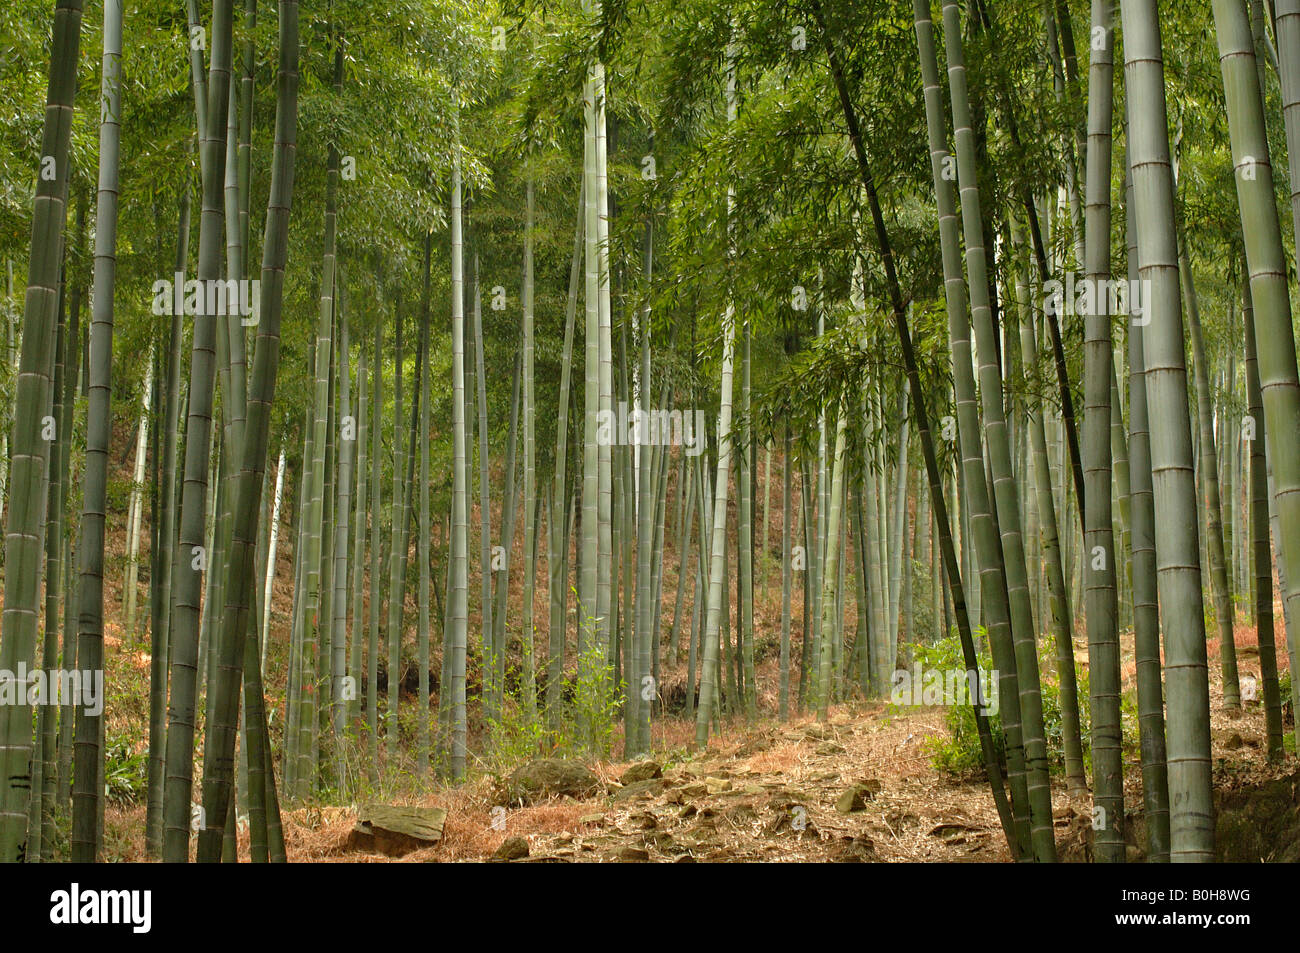 Large moso bamboo Phyllostachys pubescens culms in bamboo forest Anhui where film Crouching Tiger Hidden Dragon filmed Stock Photo